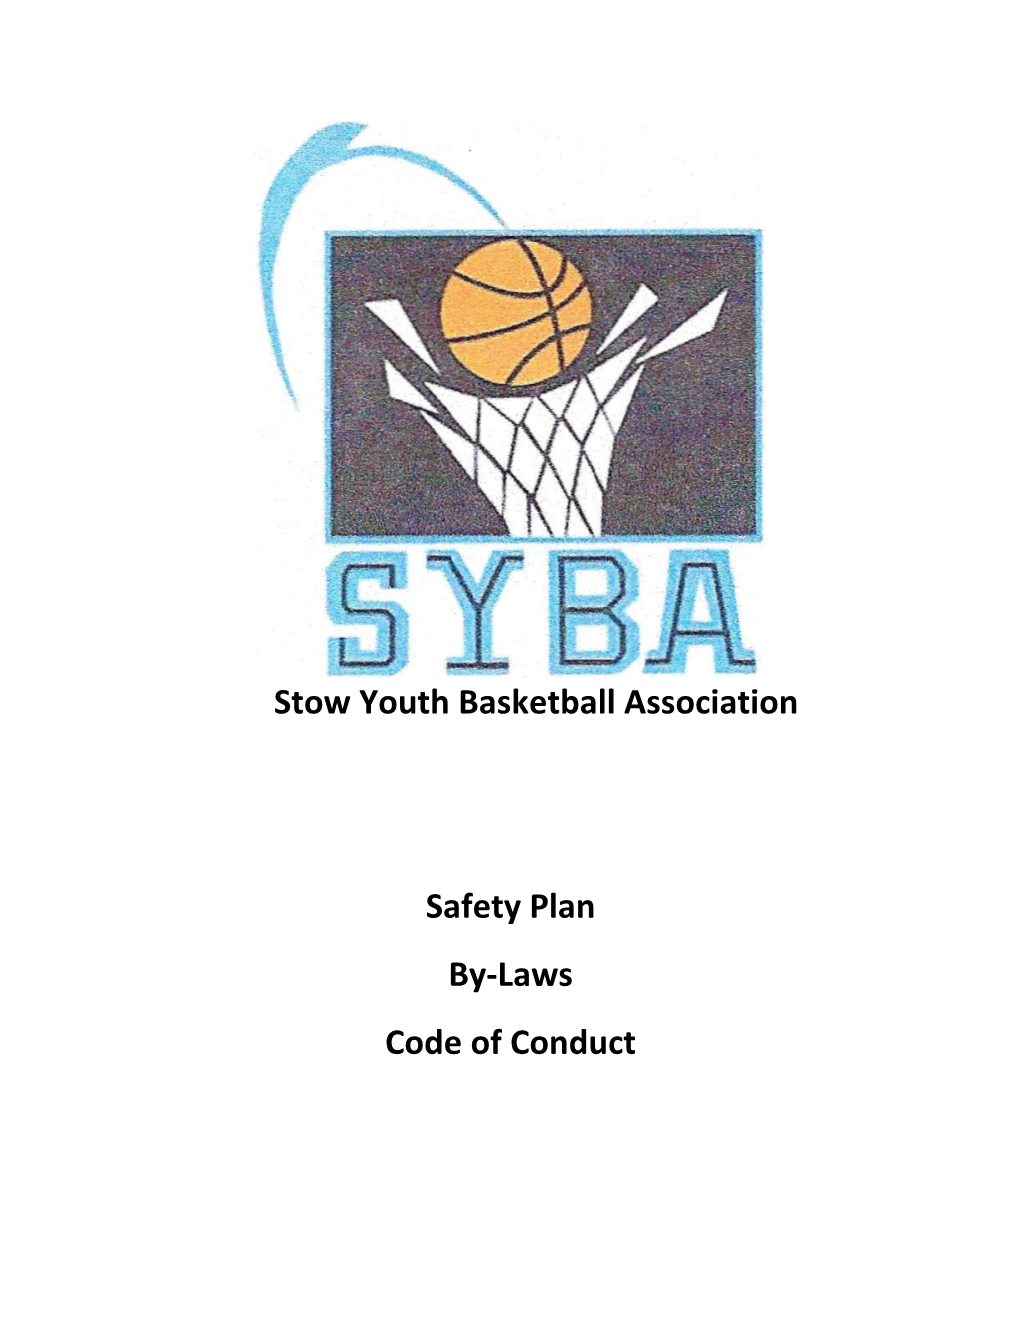 Stow Youth Basketball Association